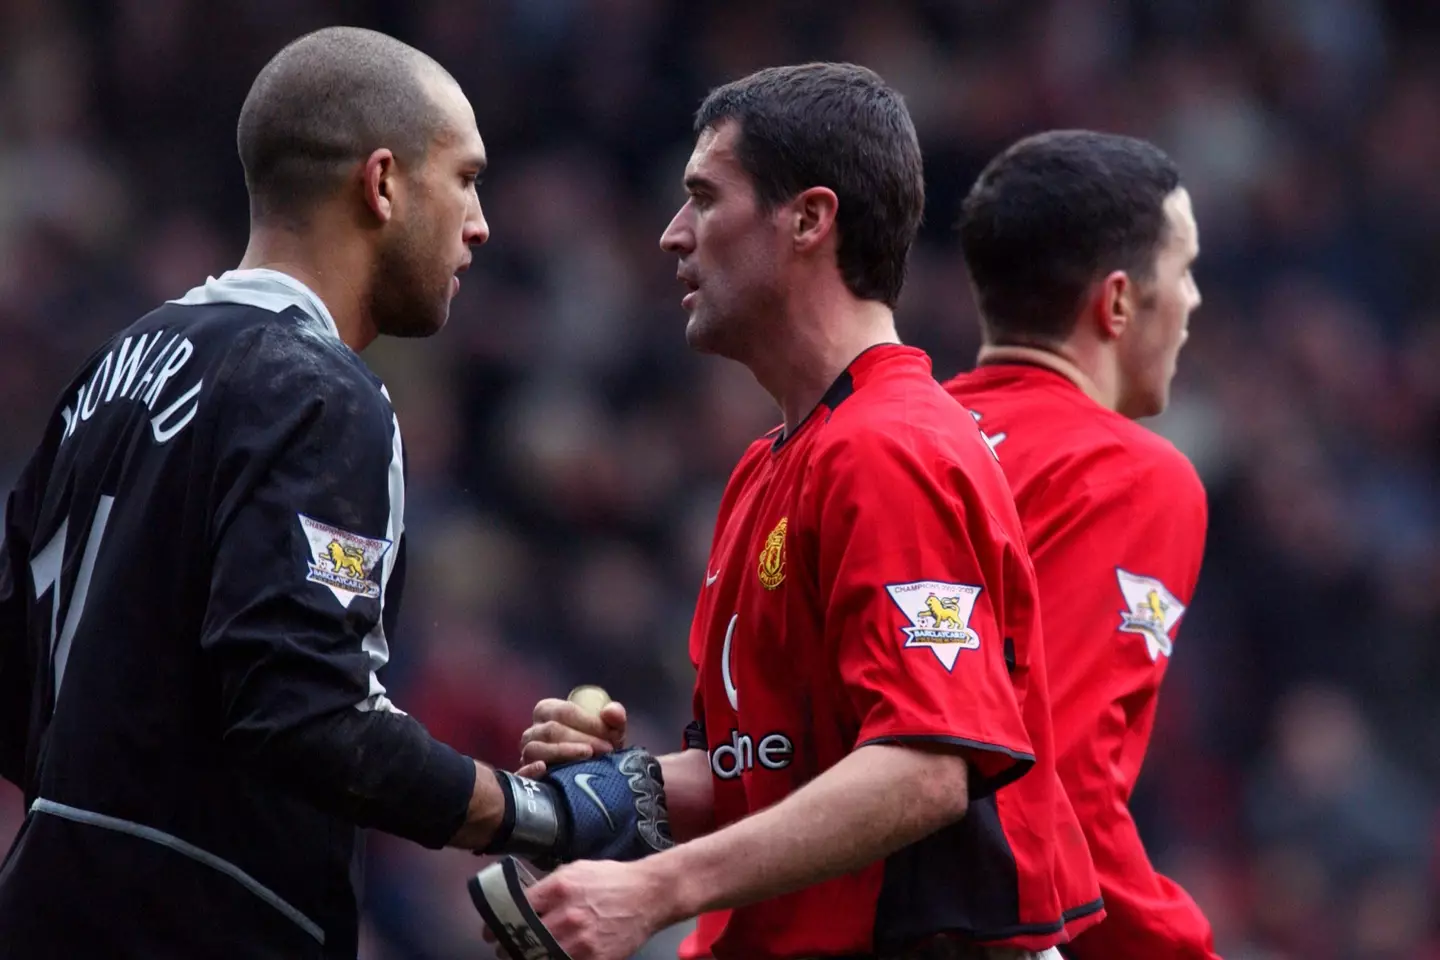 Howard and Keane during a game against Manchester City. (Image